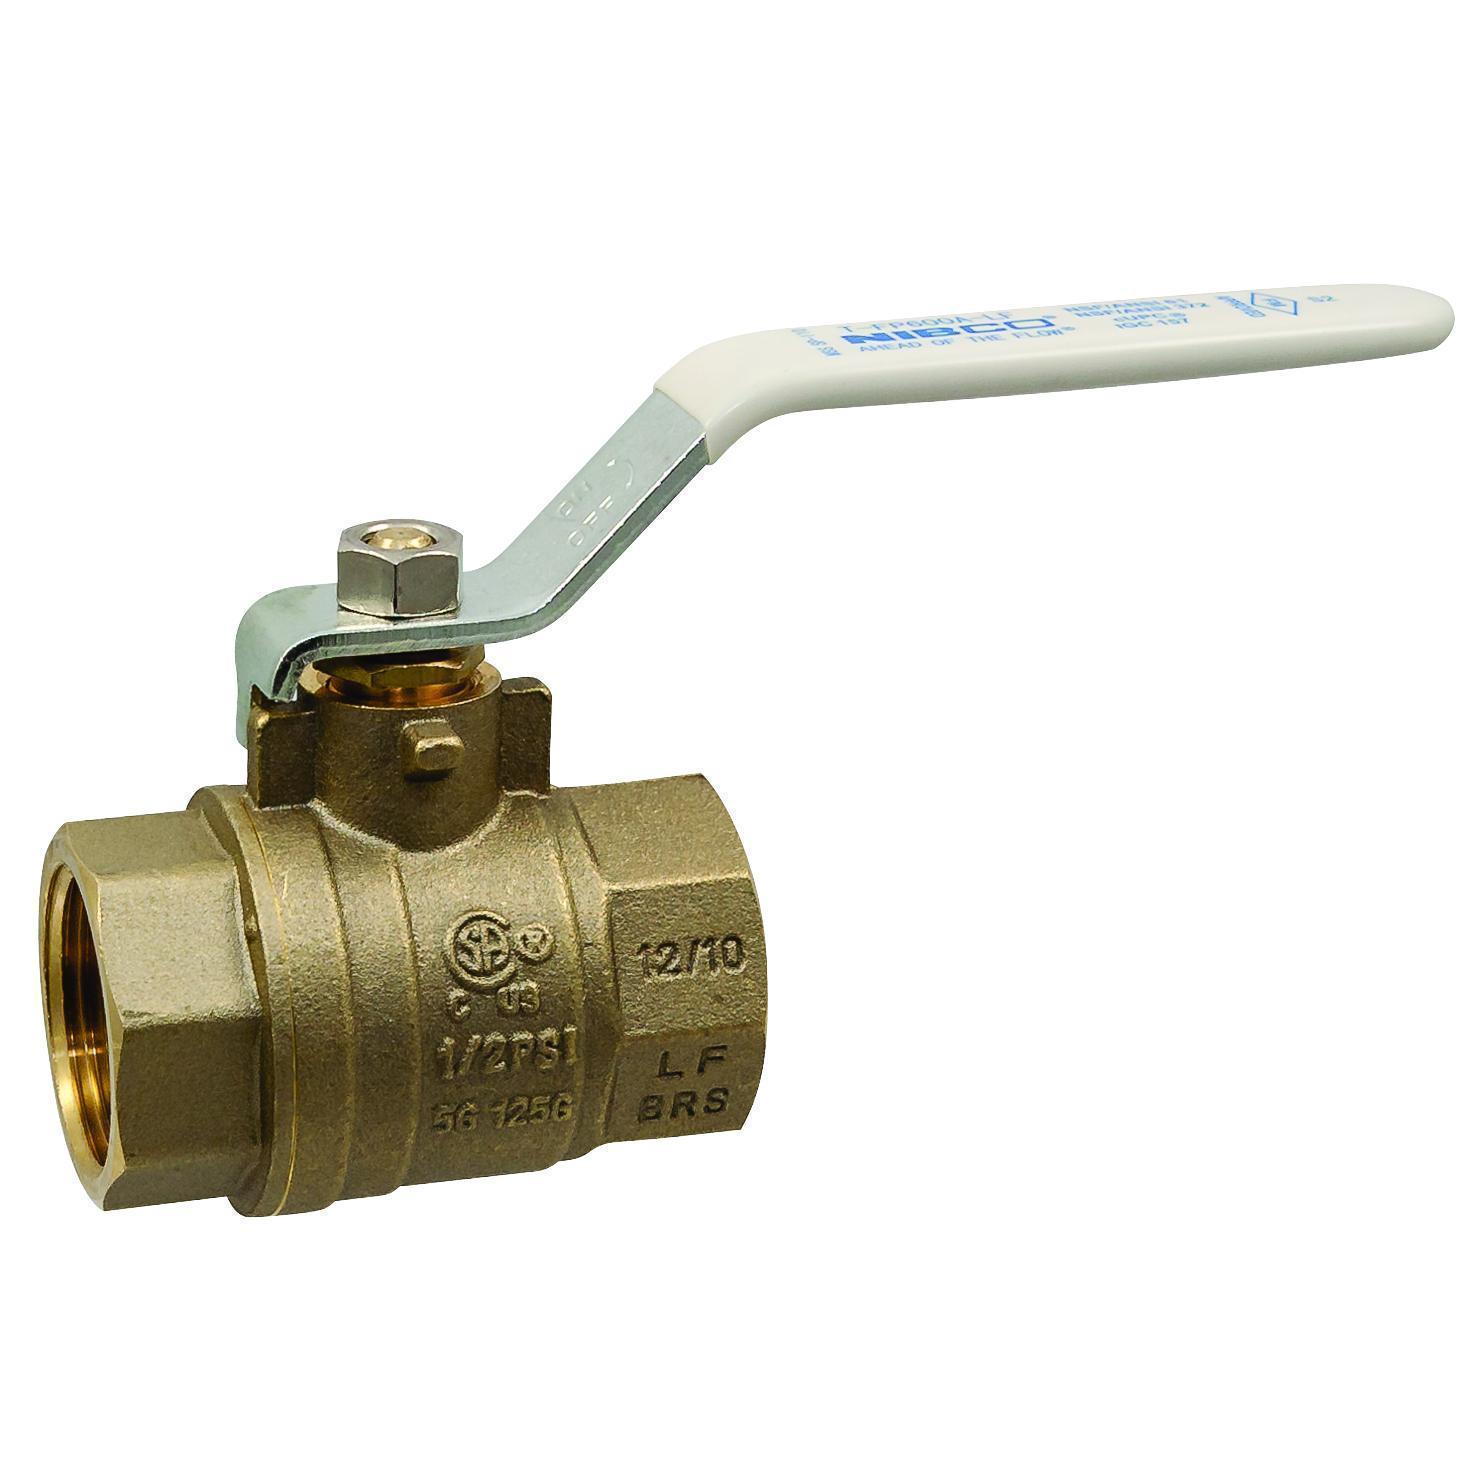 NIBCO® NL998XC T-FP-600A-LF 2-Piece Ball Valve, 1-1/2 in Nominal, FNPT End Style, Brass Body, Full Port, PTFE Softgoods, Import